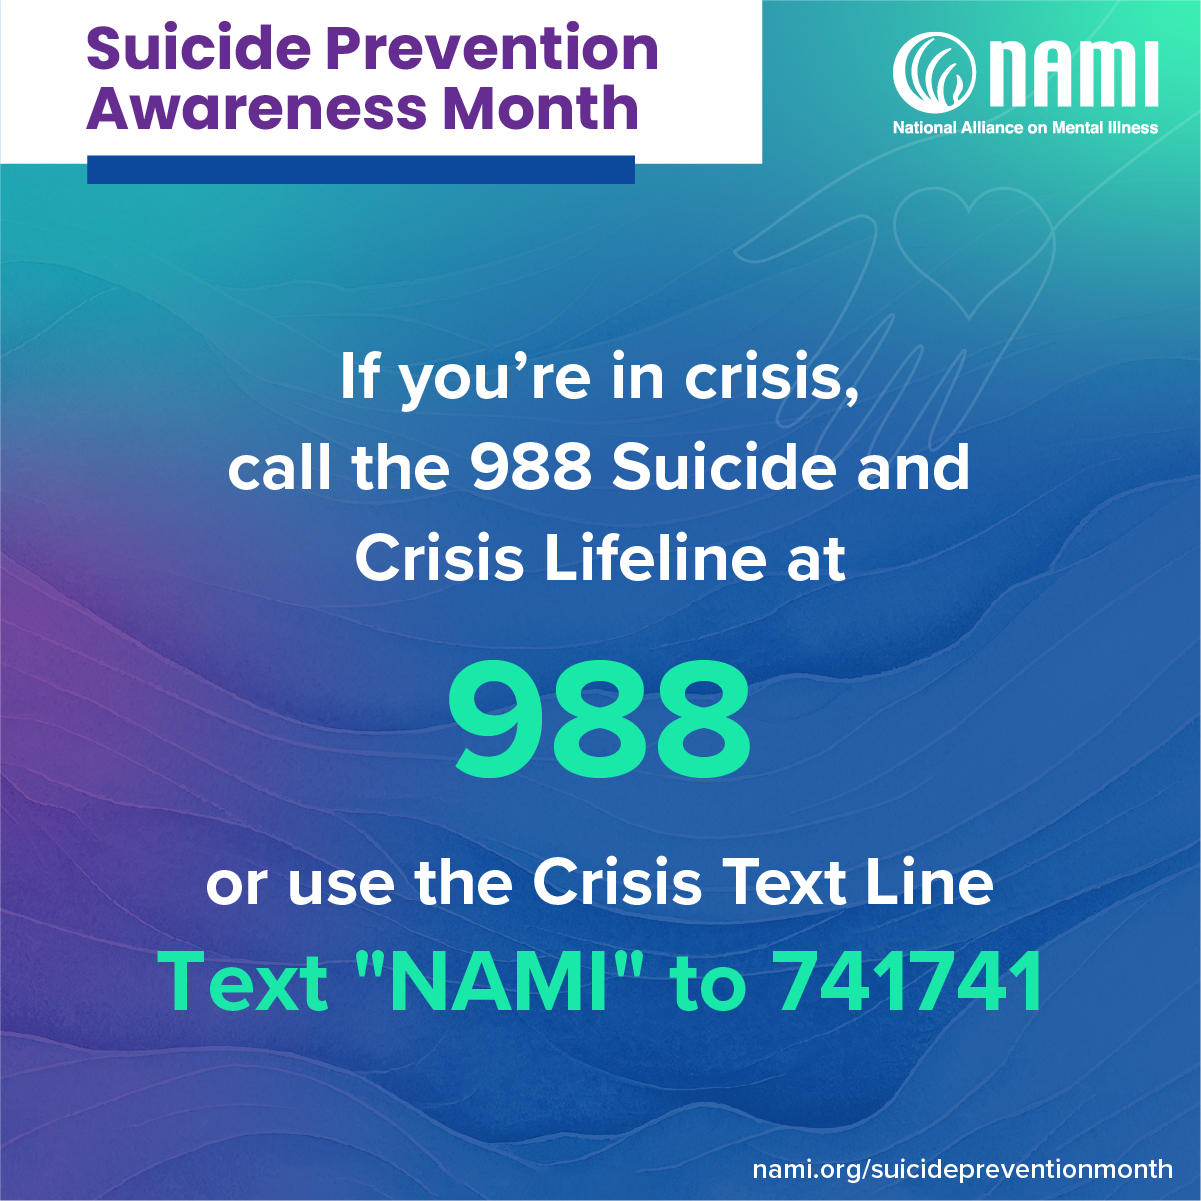 Call the 988 Suicide and Crisis Lifeline at 988 if you need help or text "NAMI" to 741741